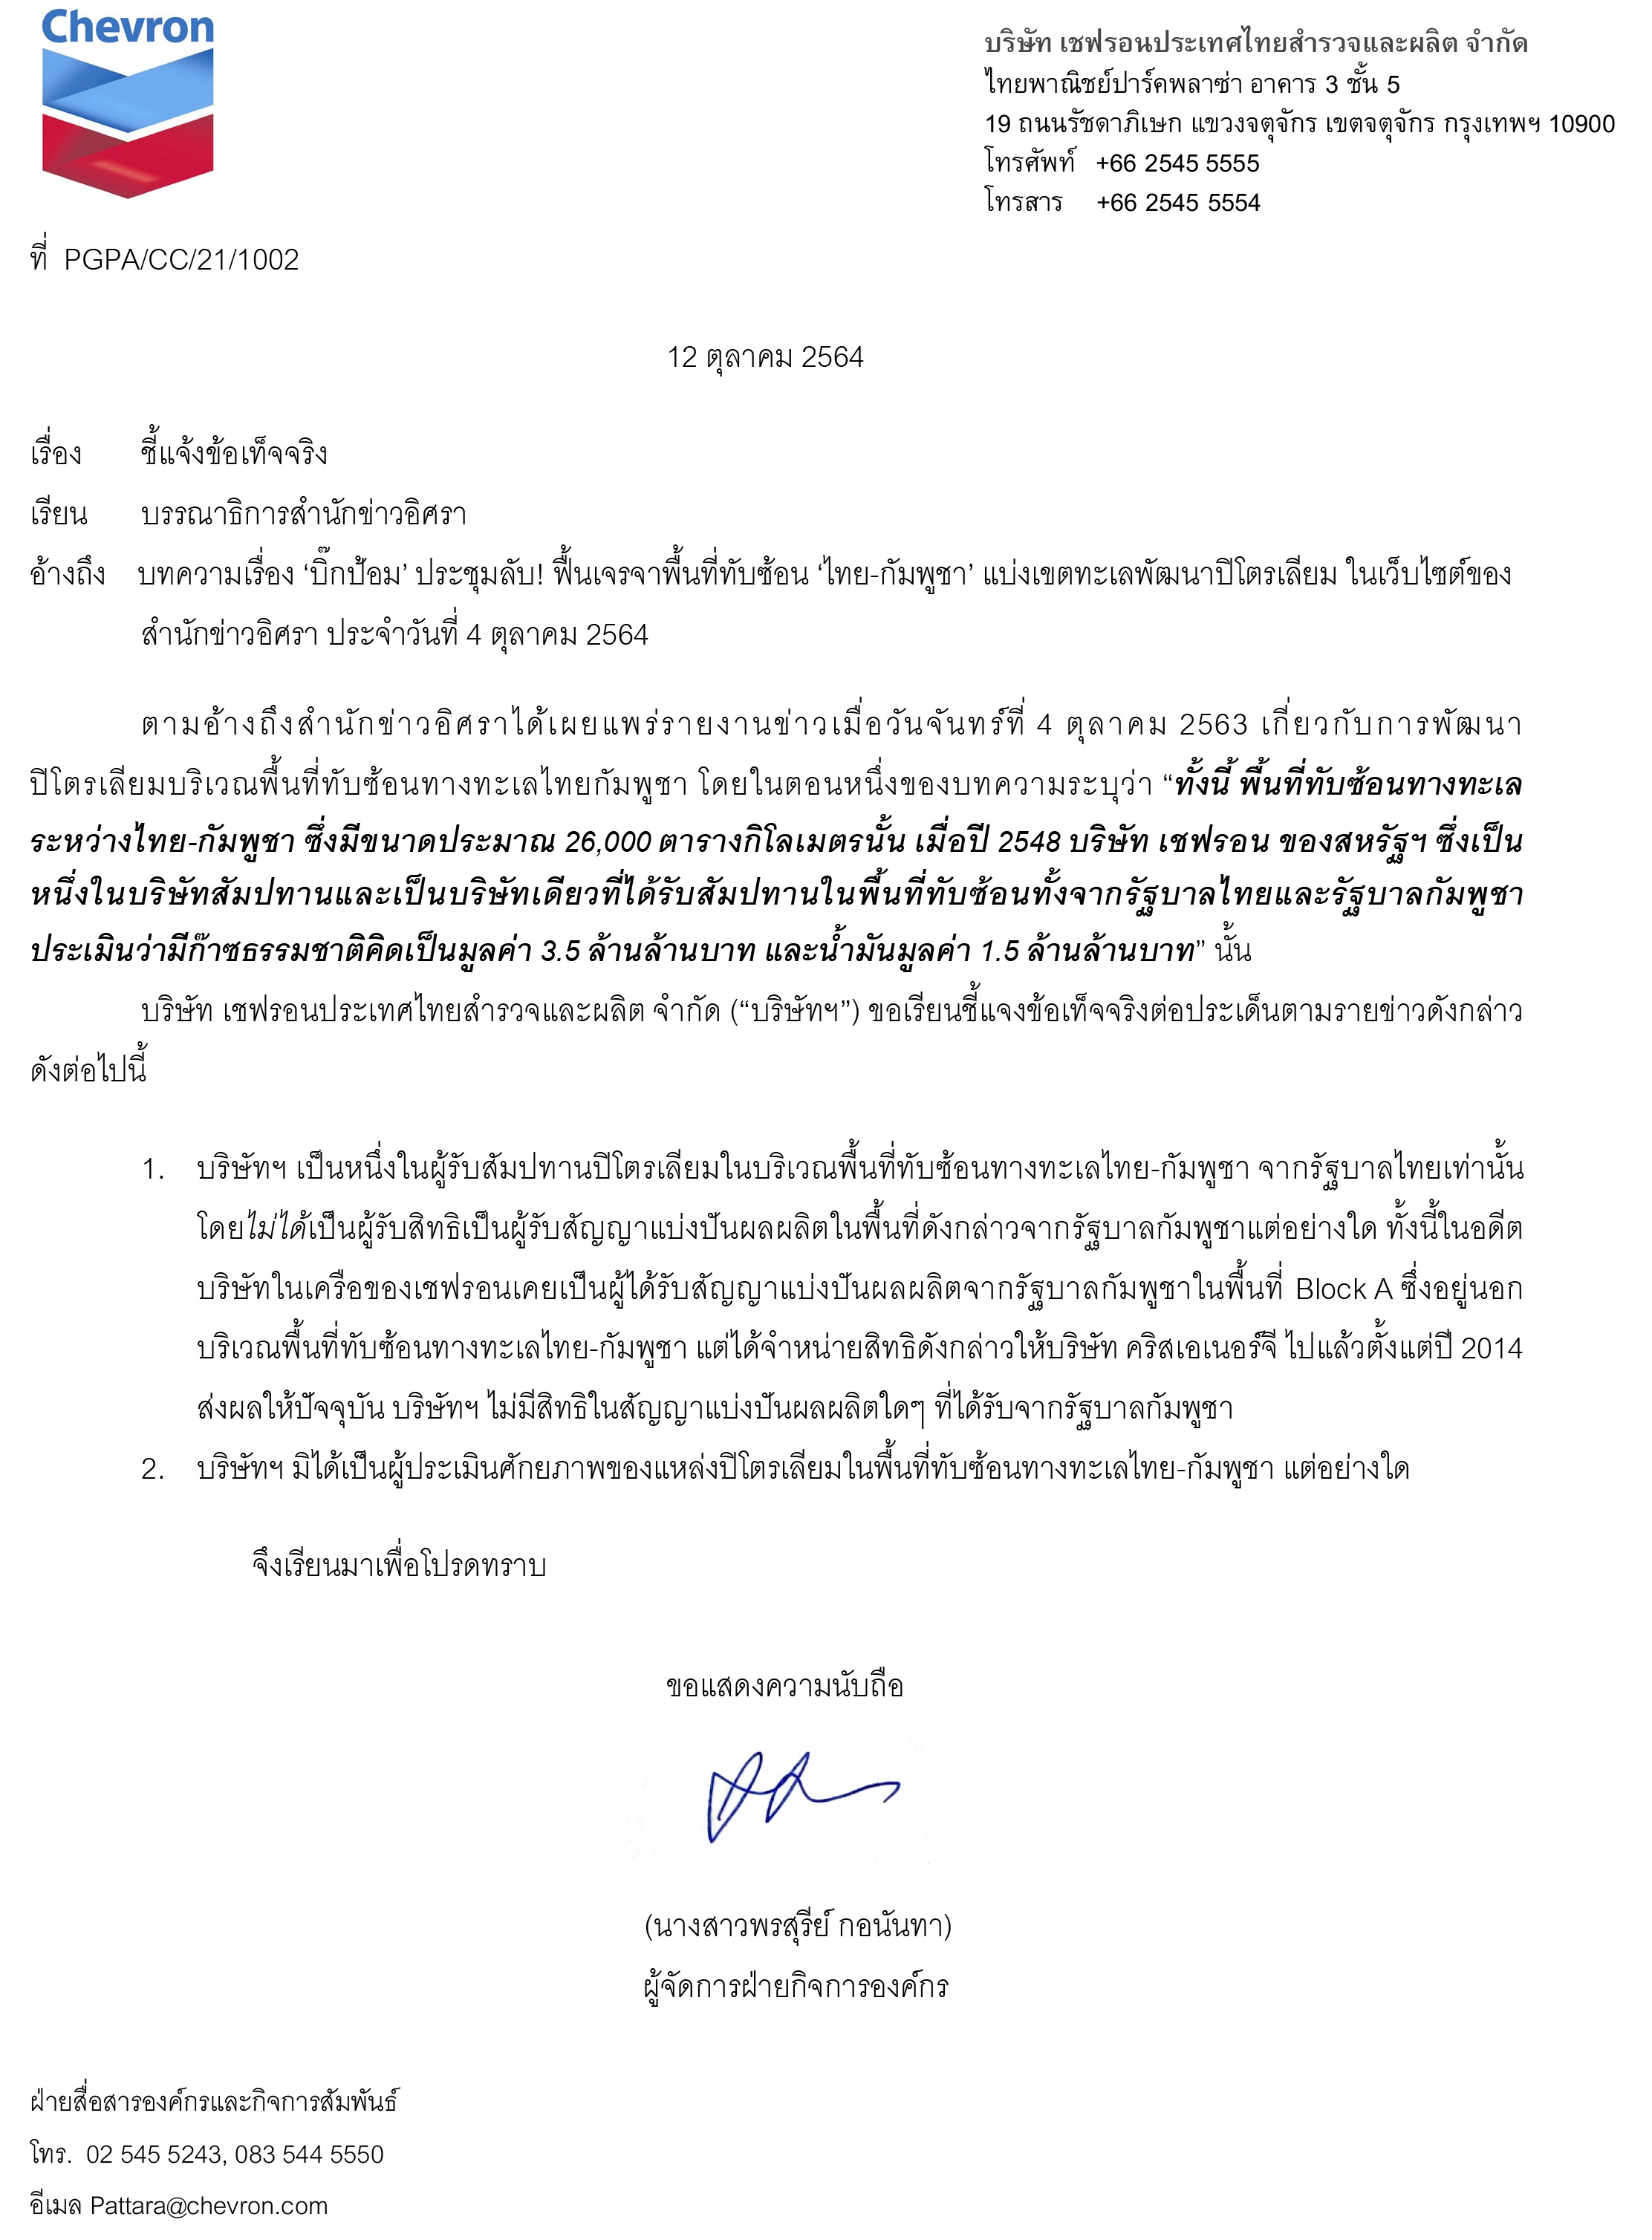 PGPA Letter to Isranews Agency 13 10 21 1